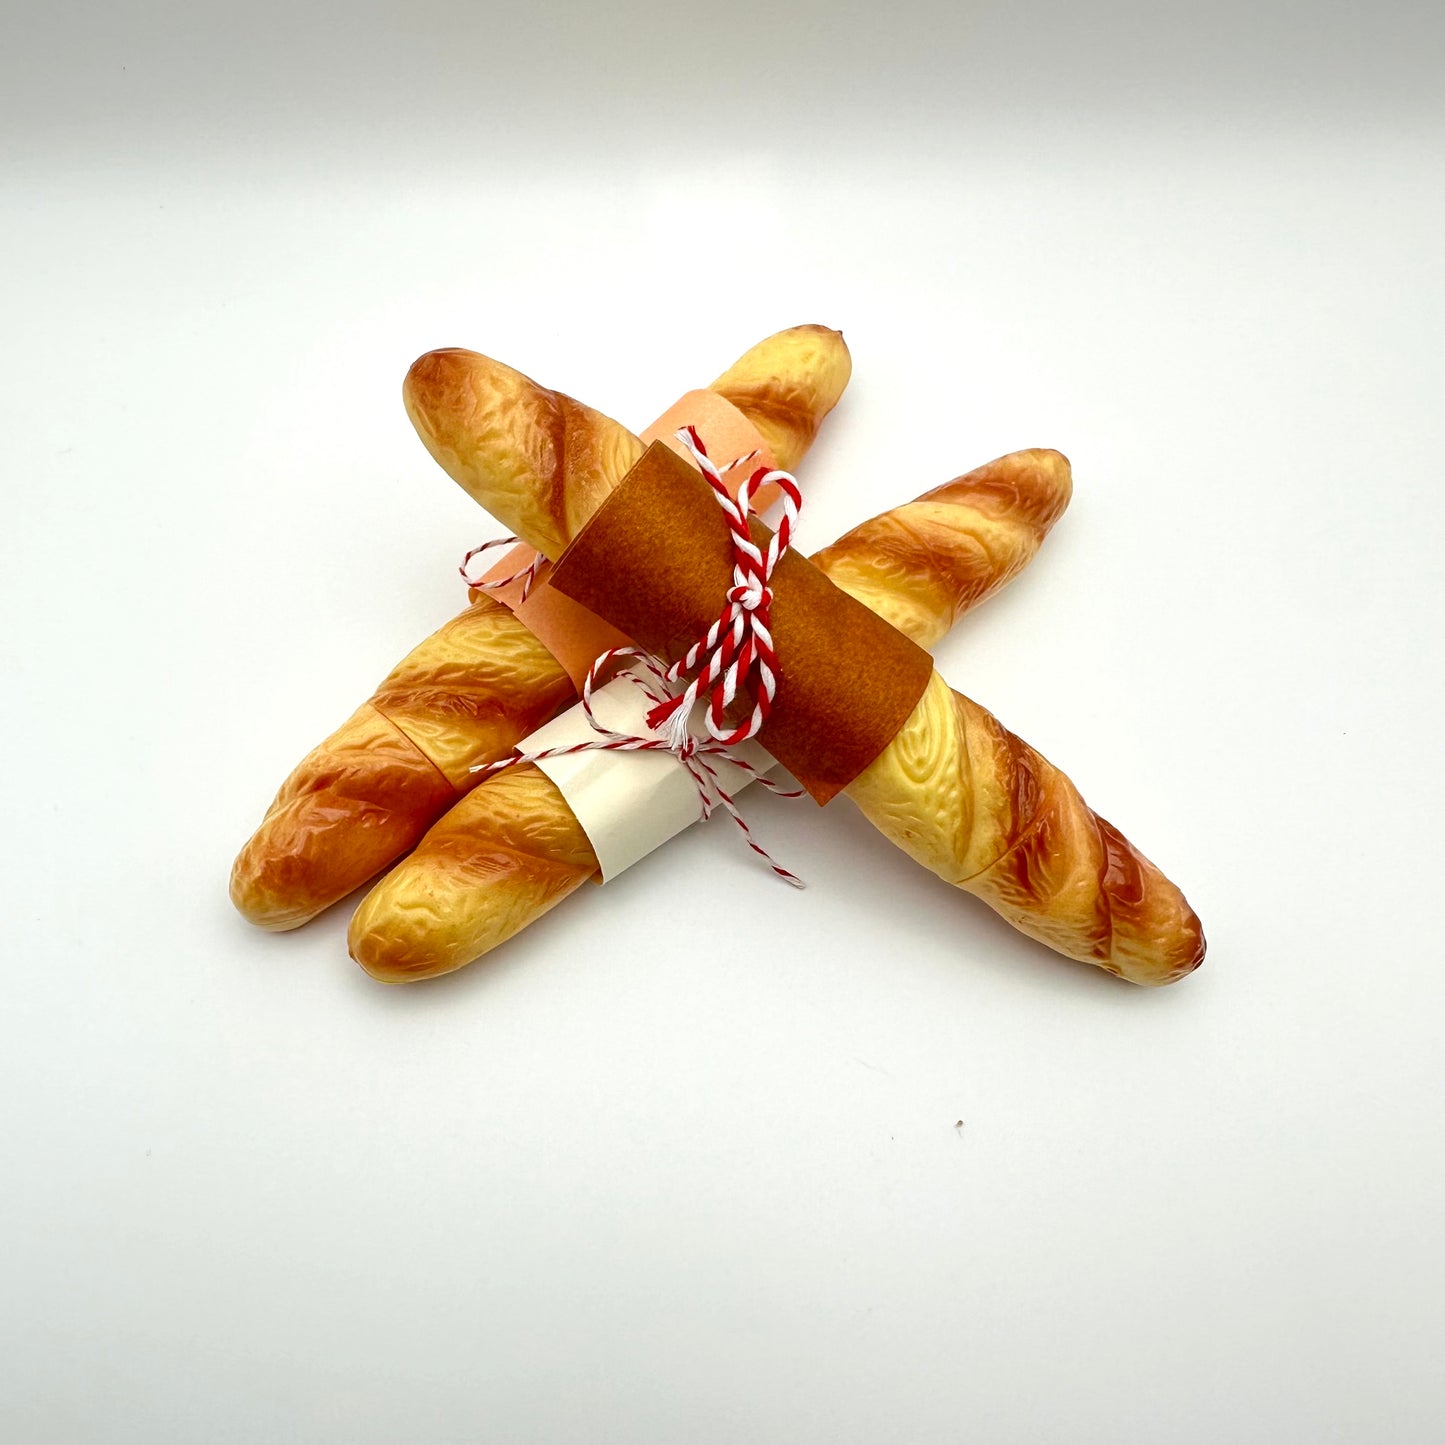 Three baguette pens wrappedin paper and twine